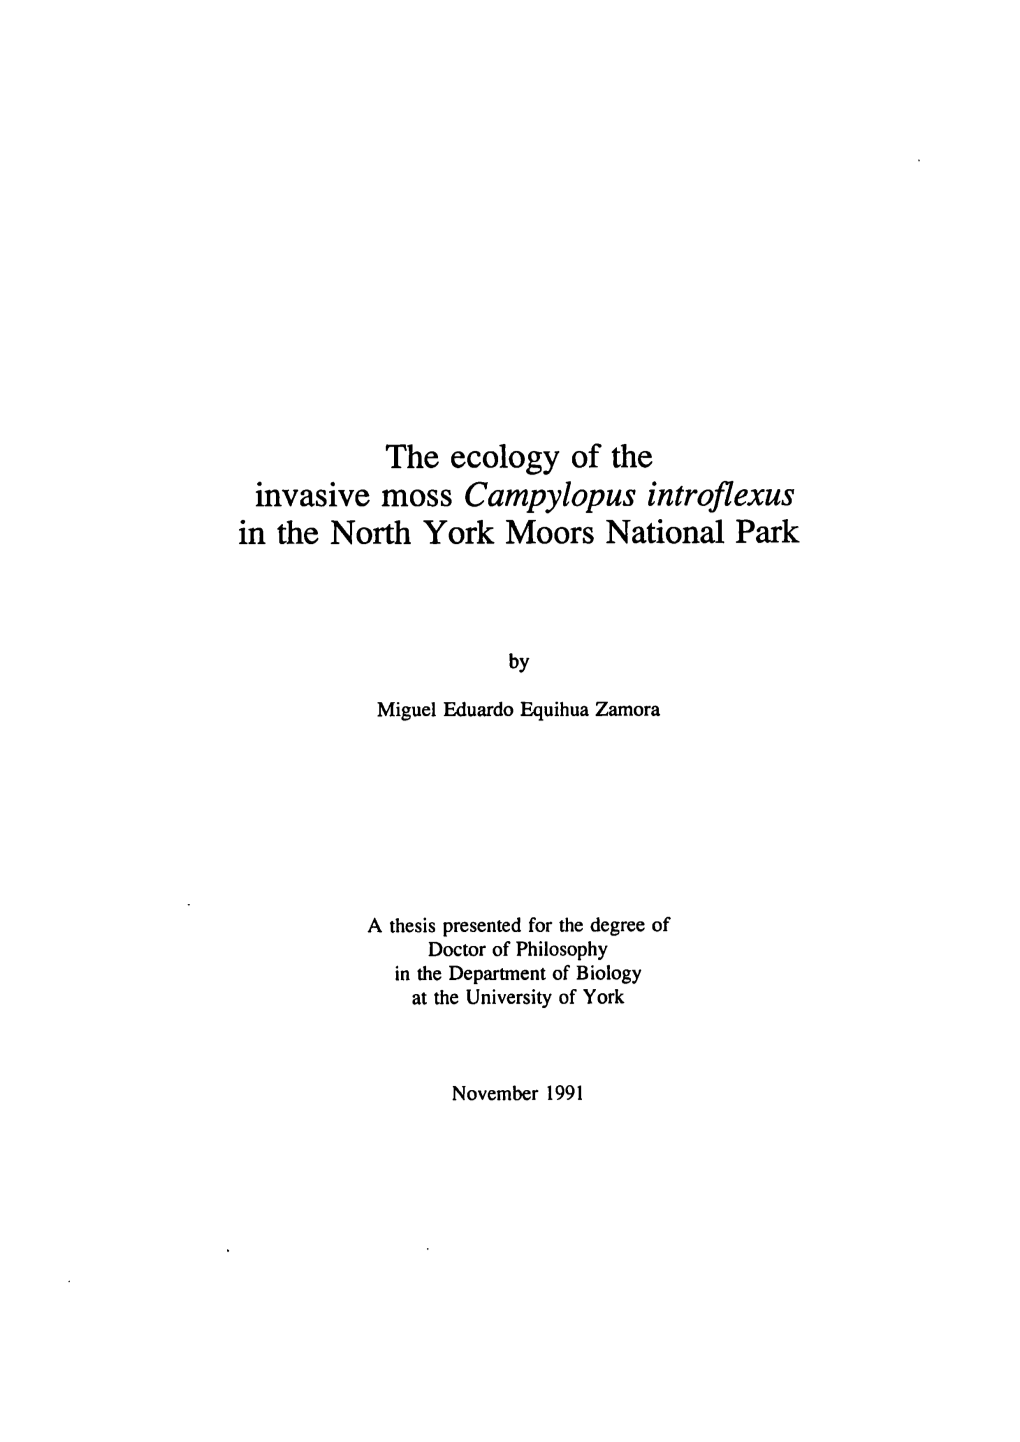 The Ecology of the in the North York Moors National Park